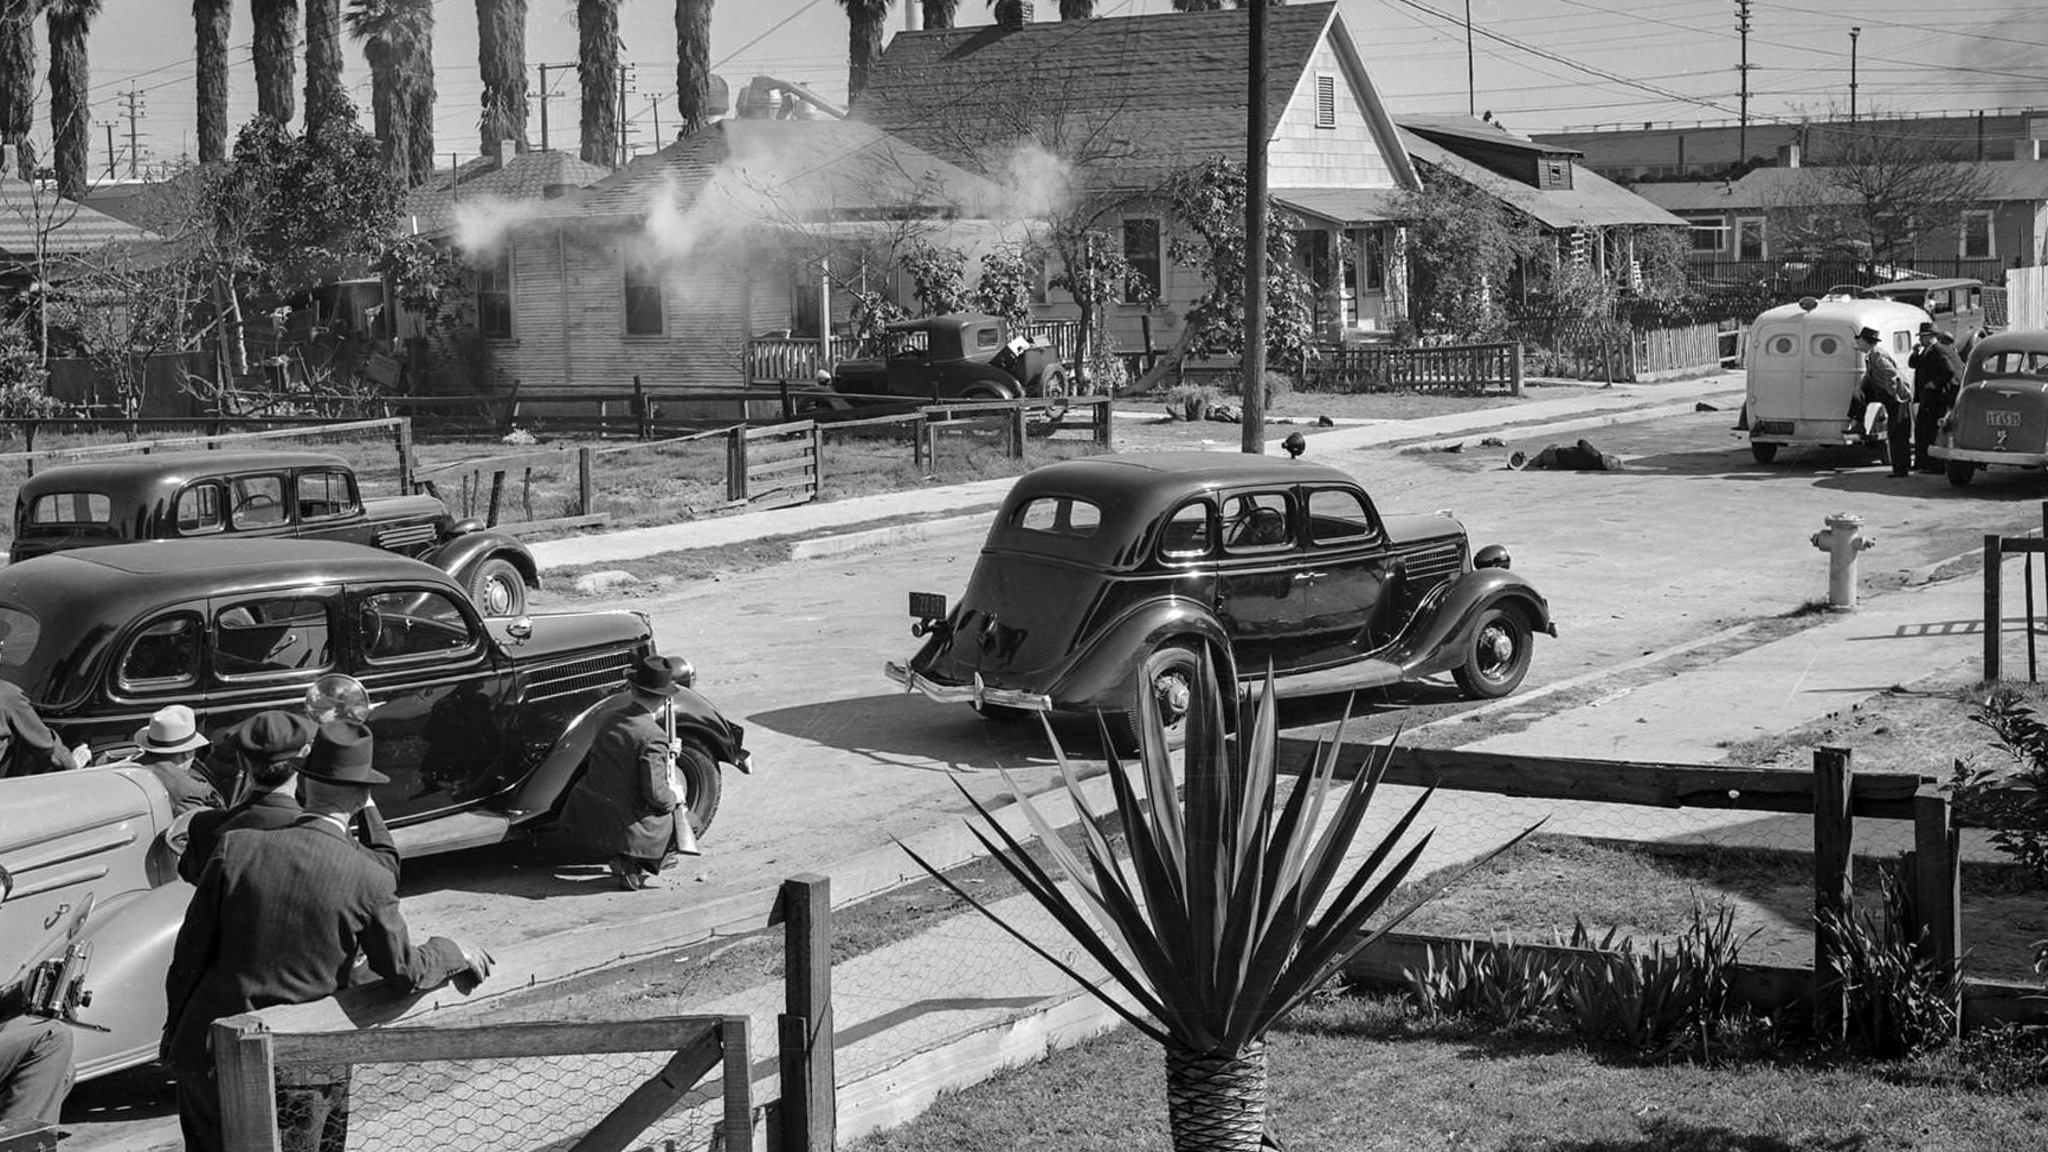 Police trade shots with barricaded suspect, Los Angeles, Feb. 17, 1938.jpg